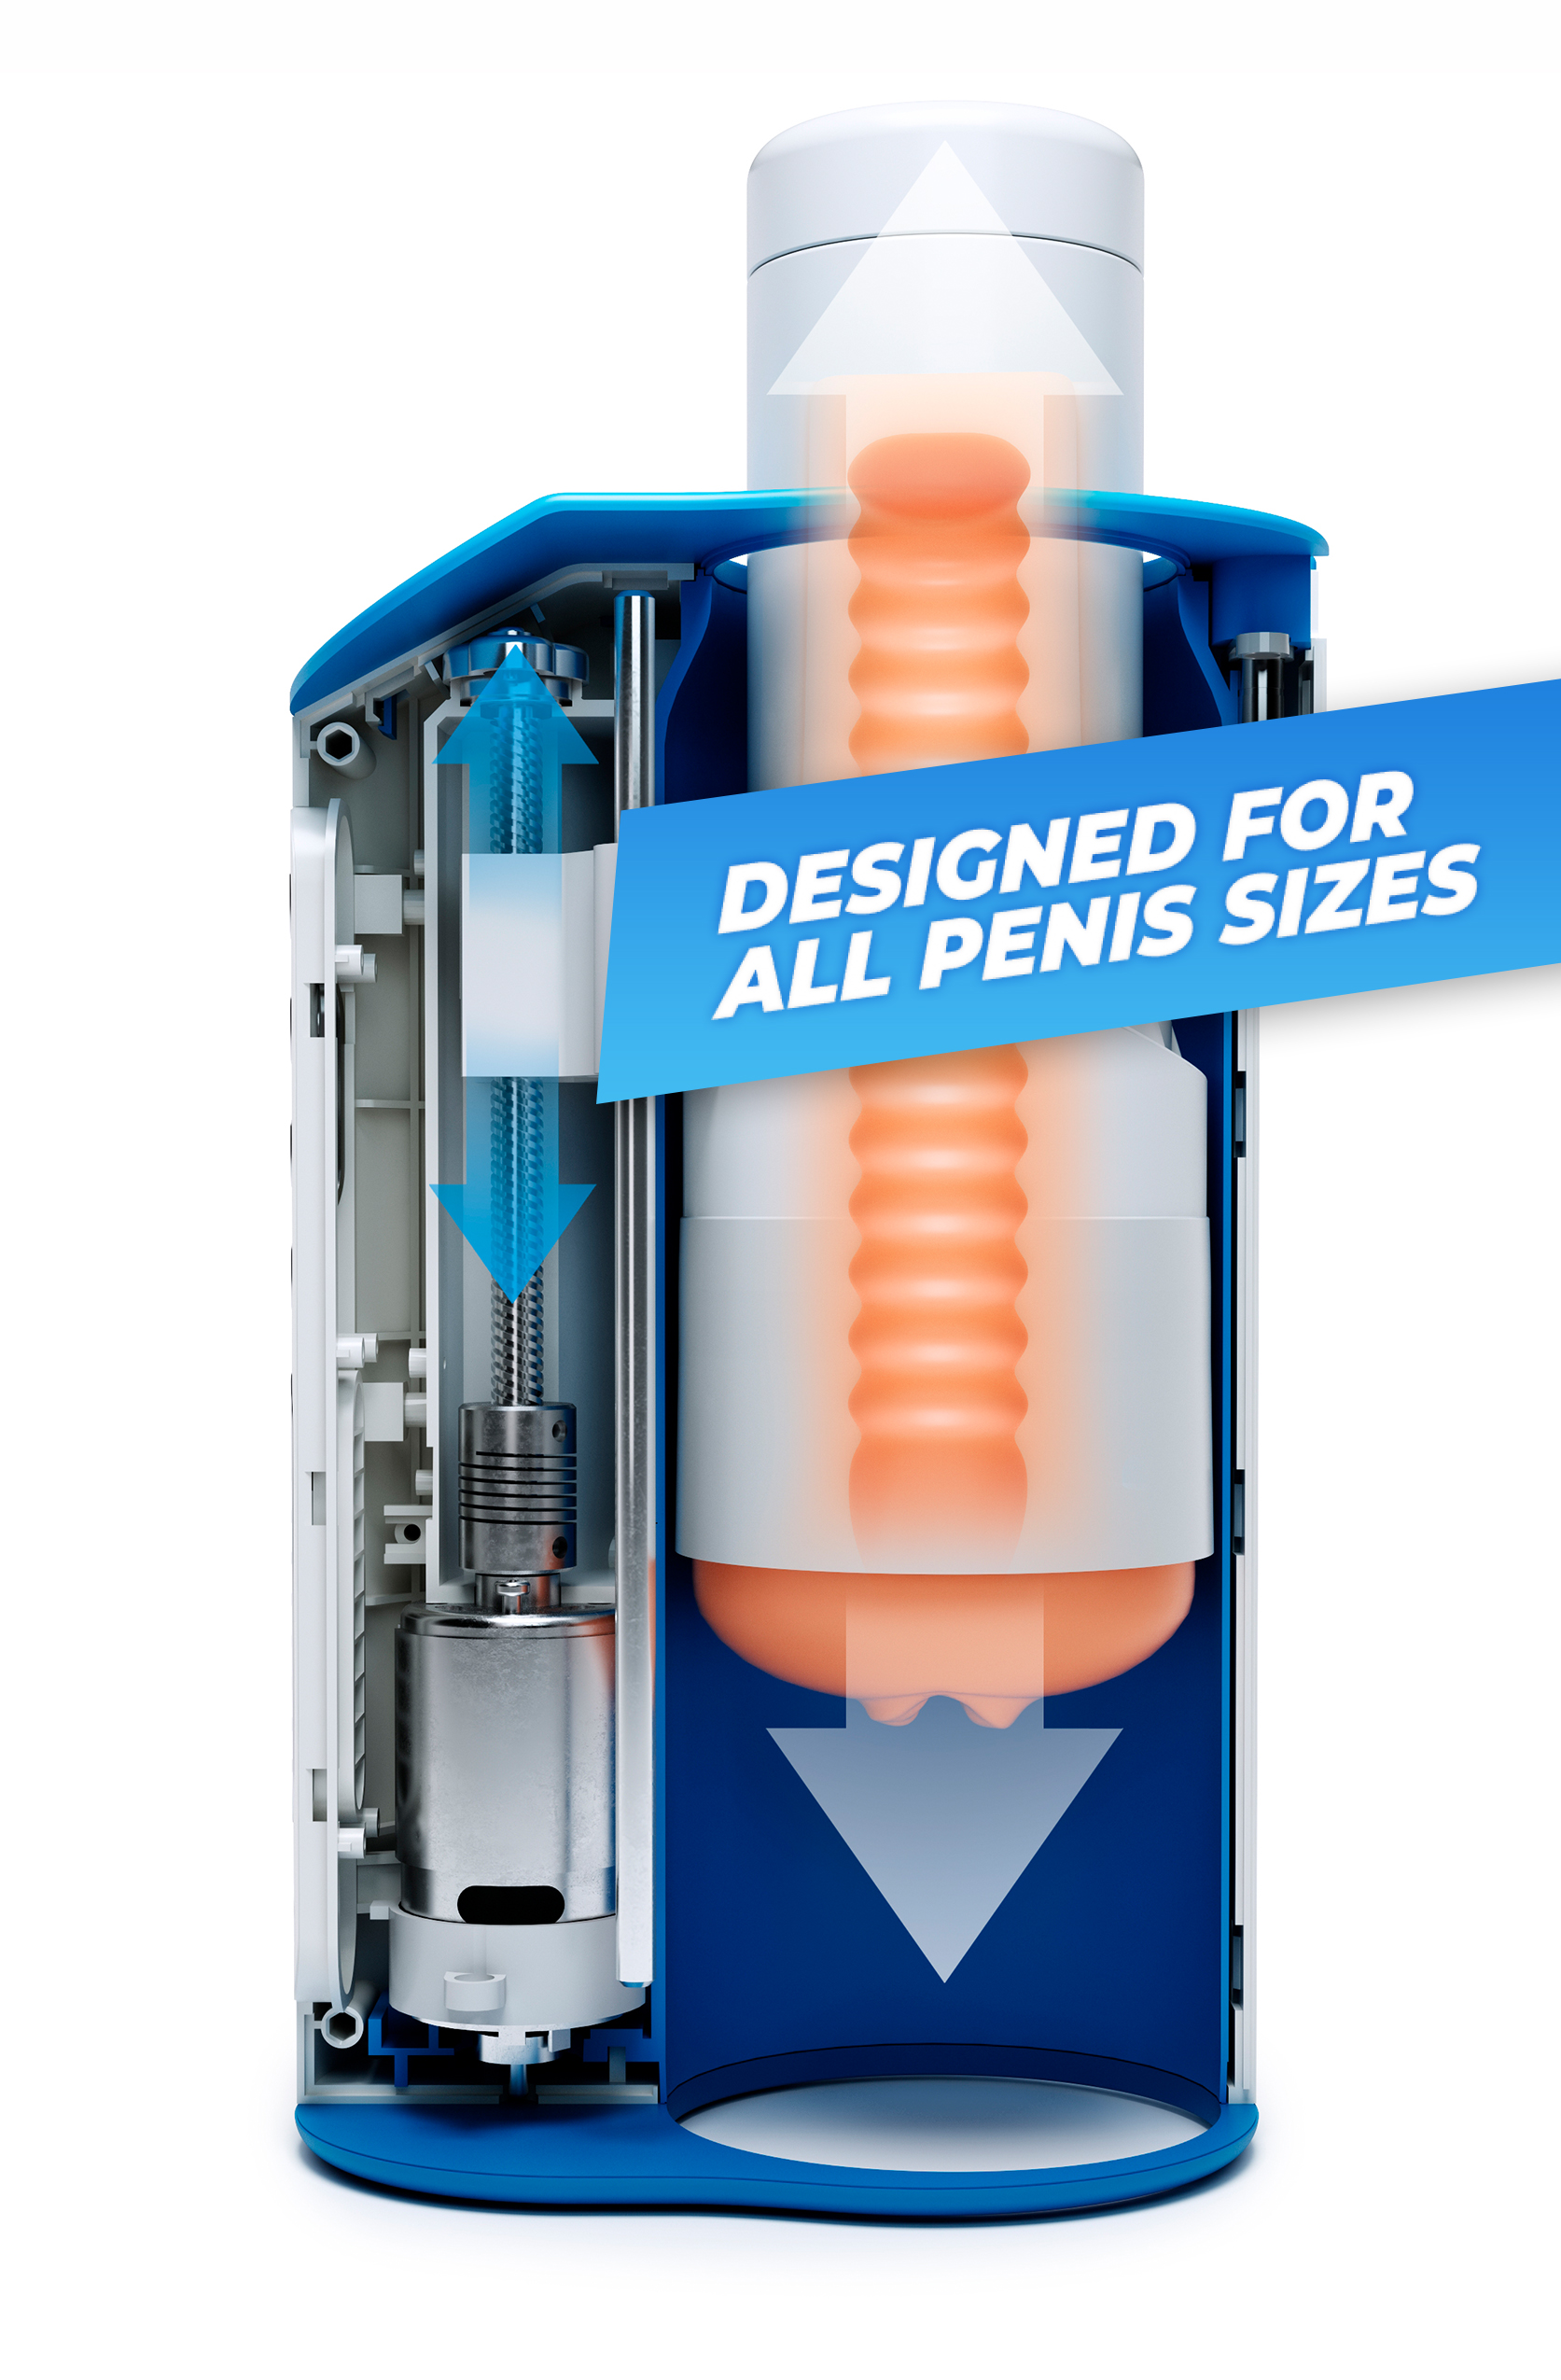 Autoblow AI Ultra Machine image showing that it is made to fit all penis sizes